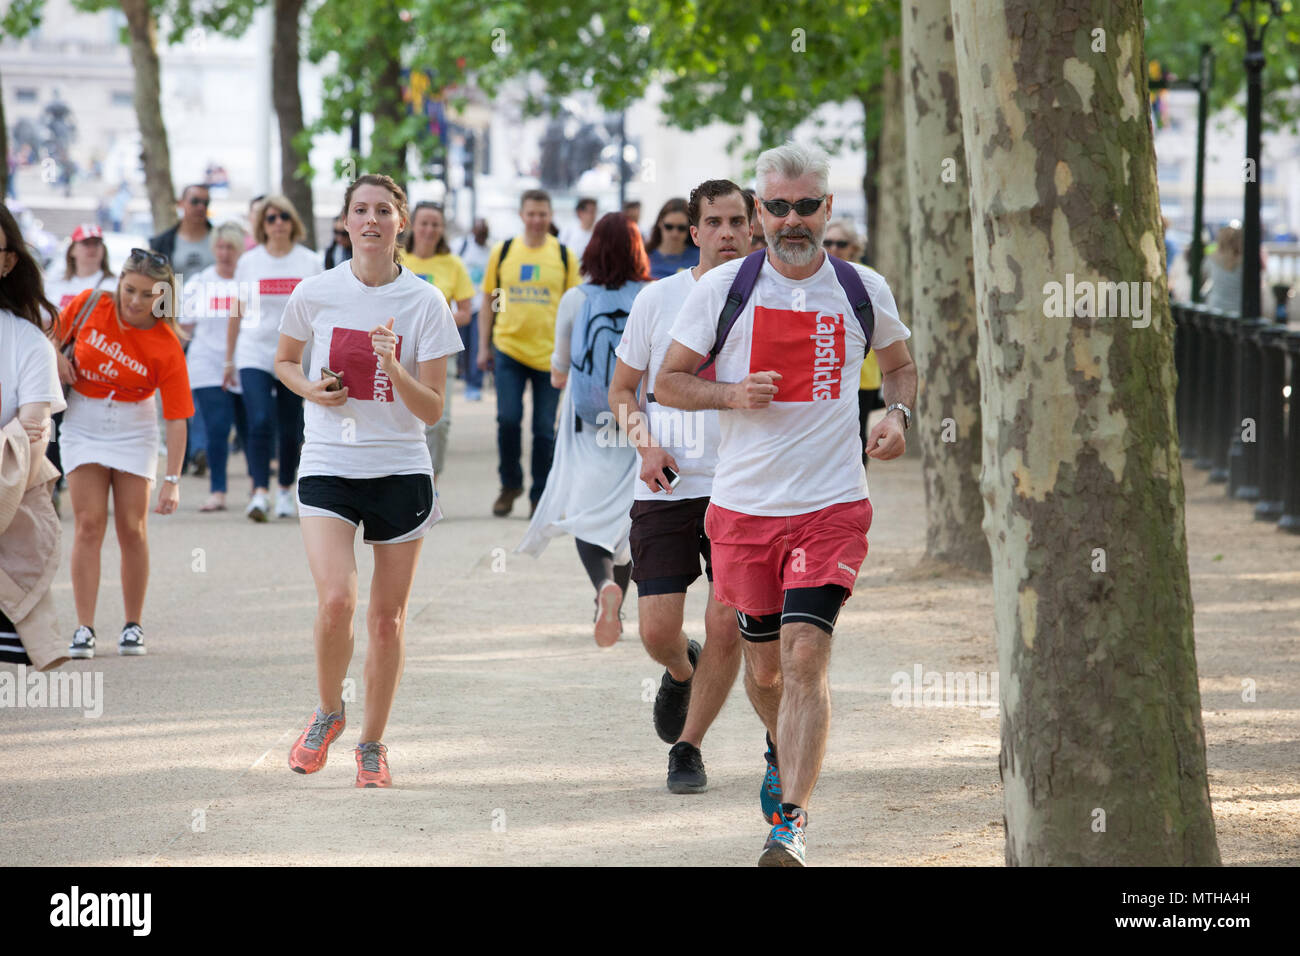 London Legal Walk 2018, an annual sponsored walk to raise money for legal aid. Those that participate are mainly lawyers and employees of legal firms. Stock Photo